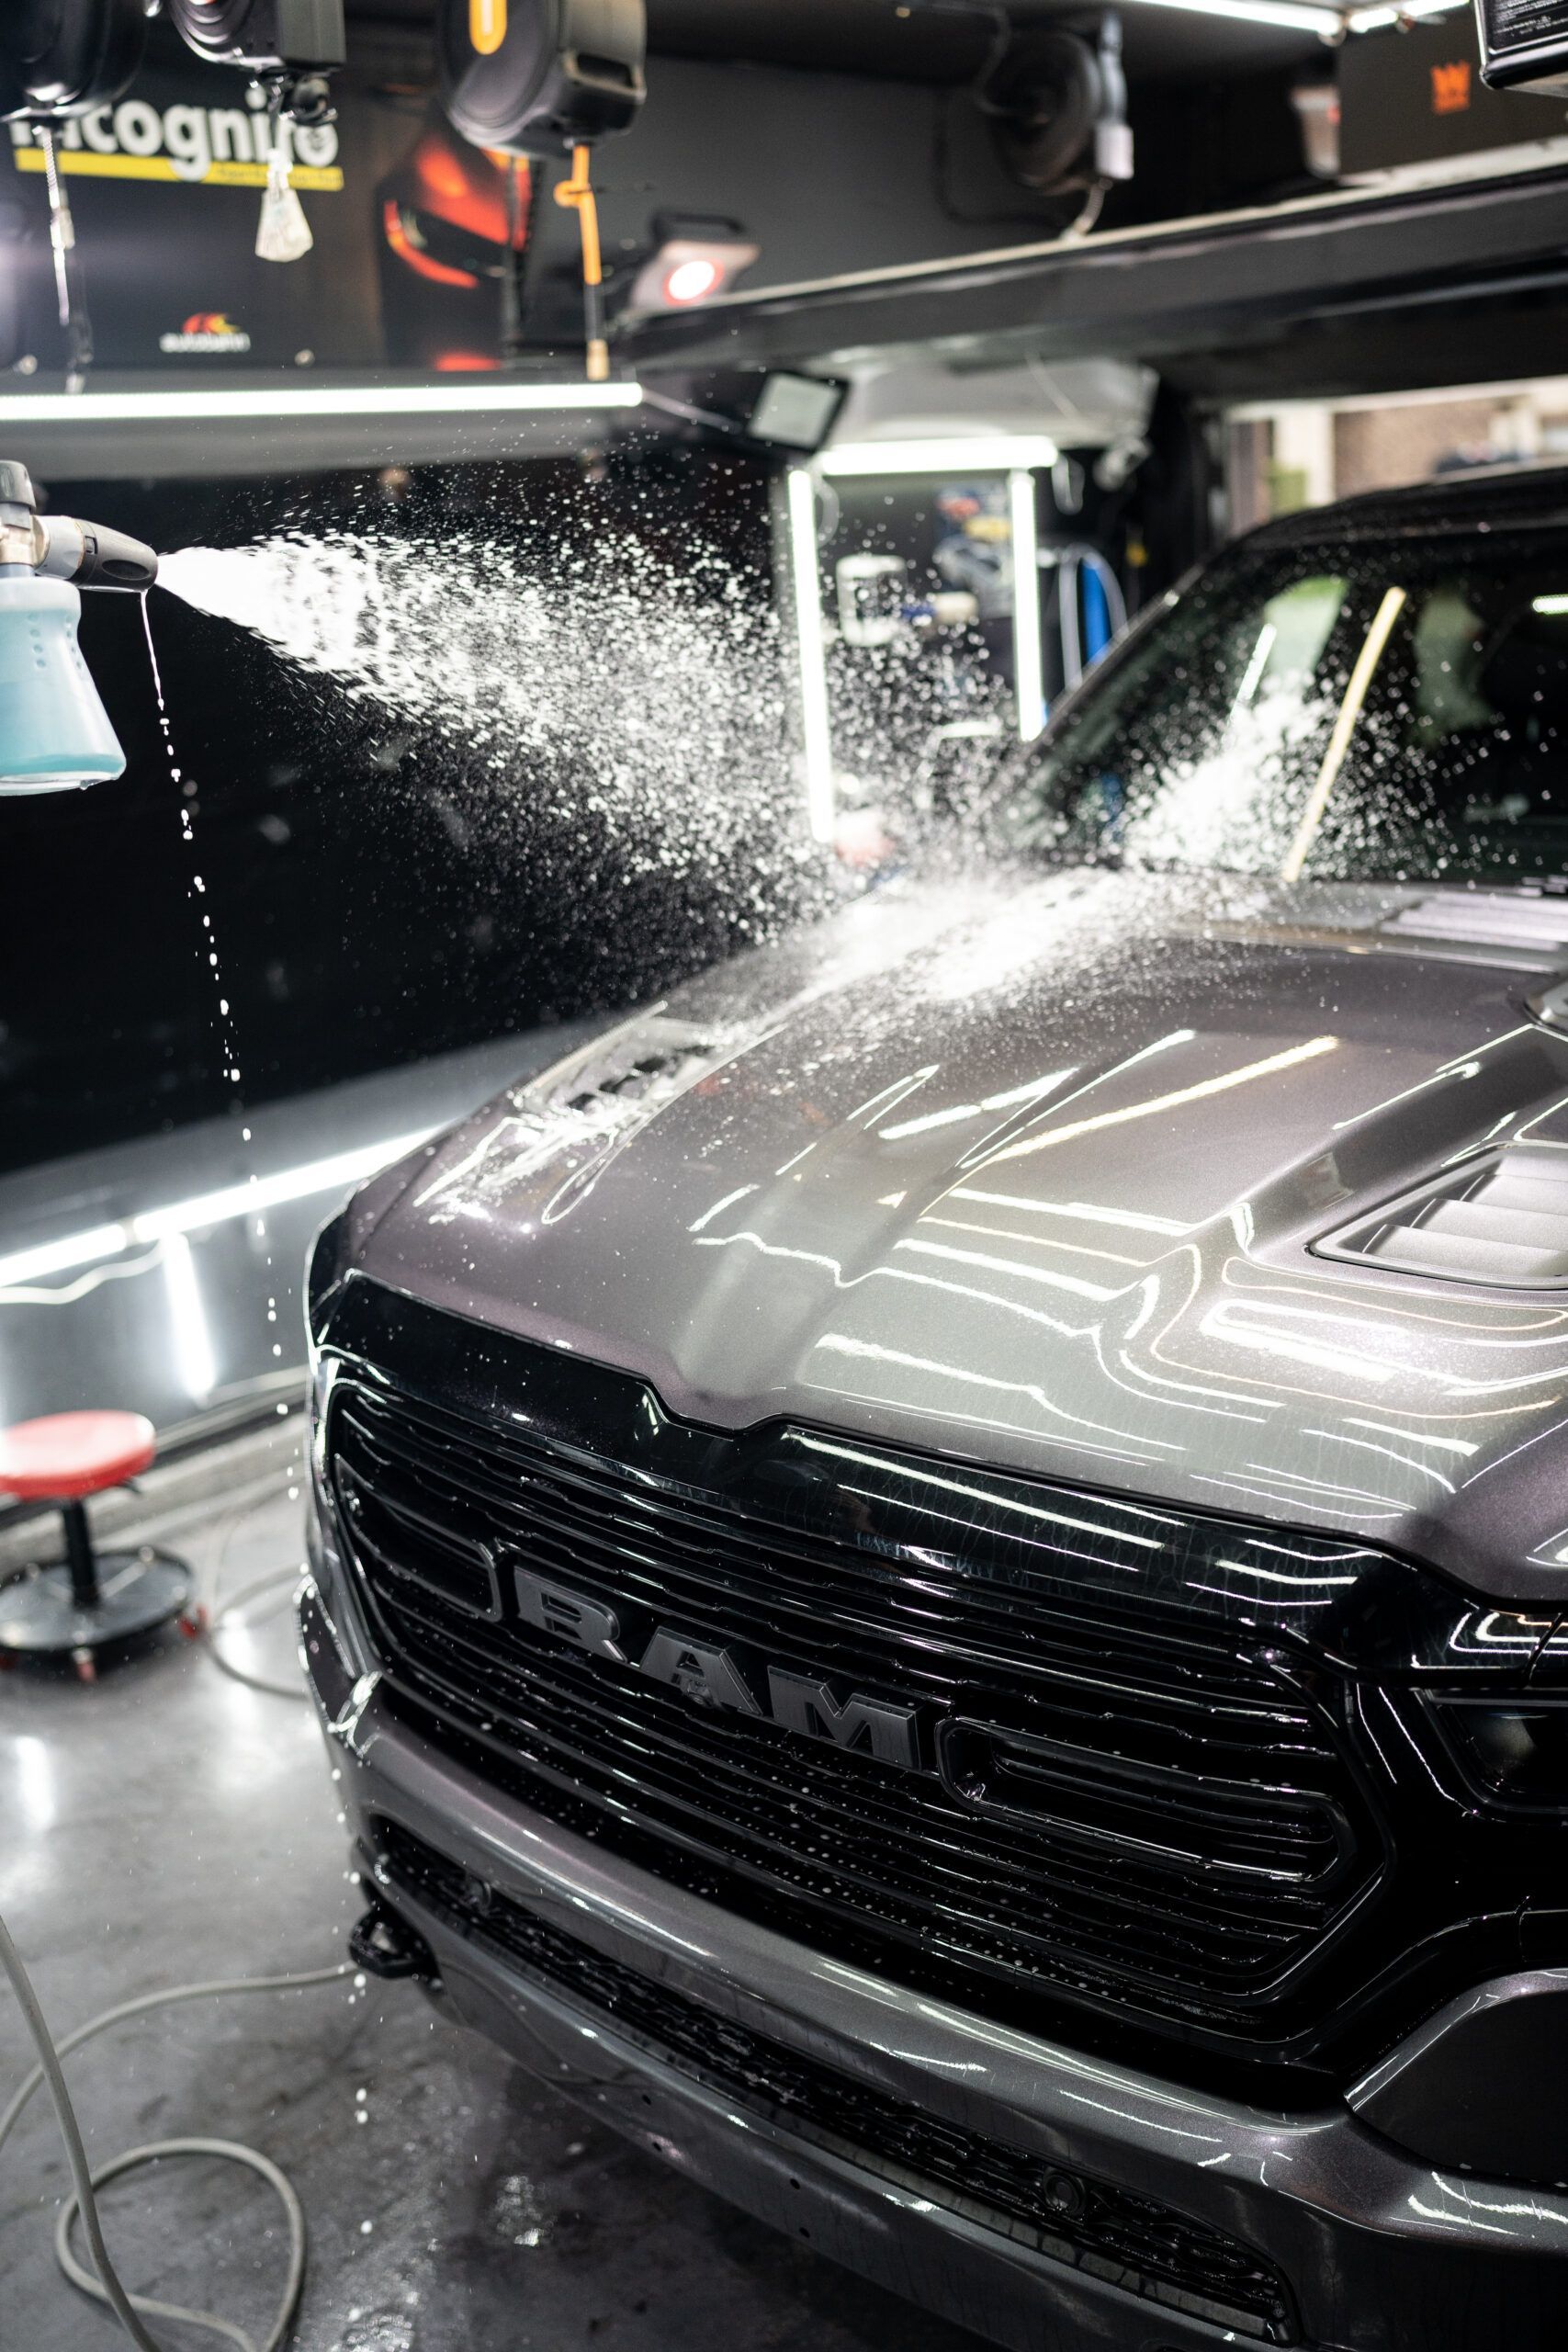 A gray ram truck is being washed in a garage.